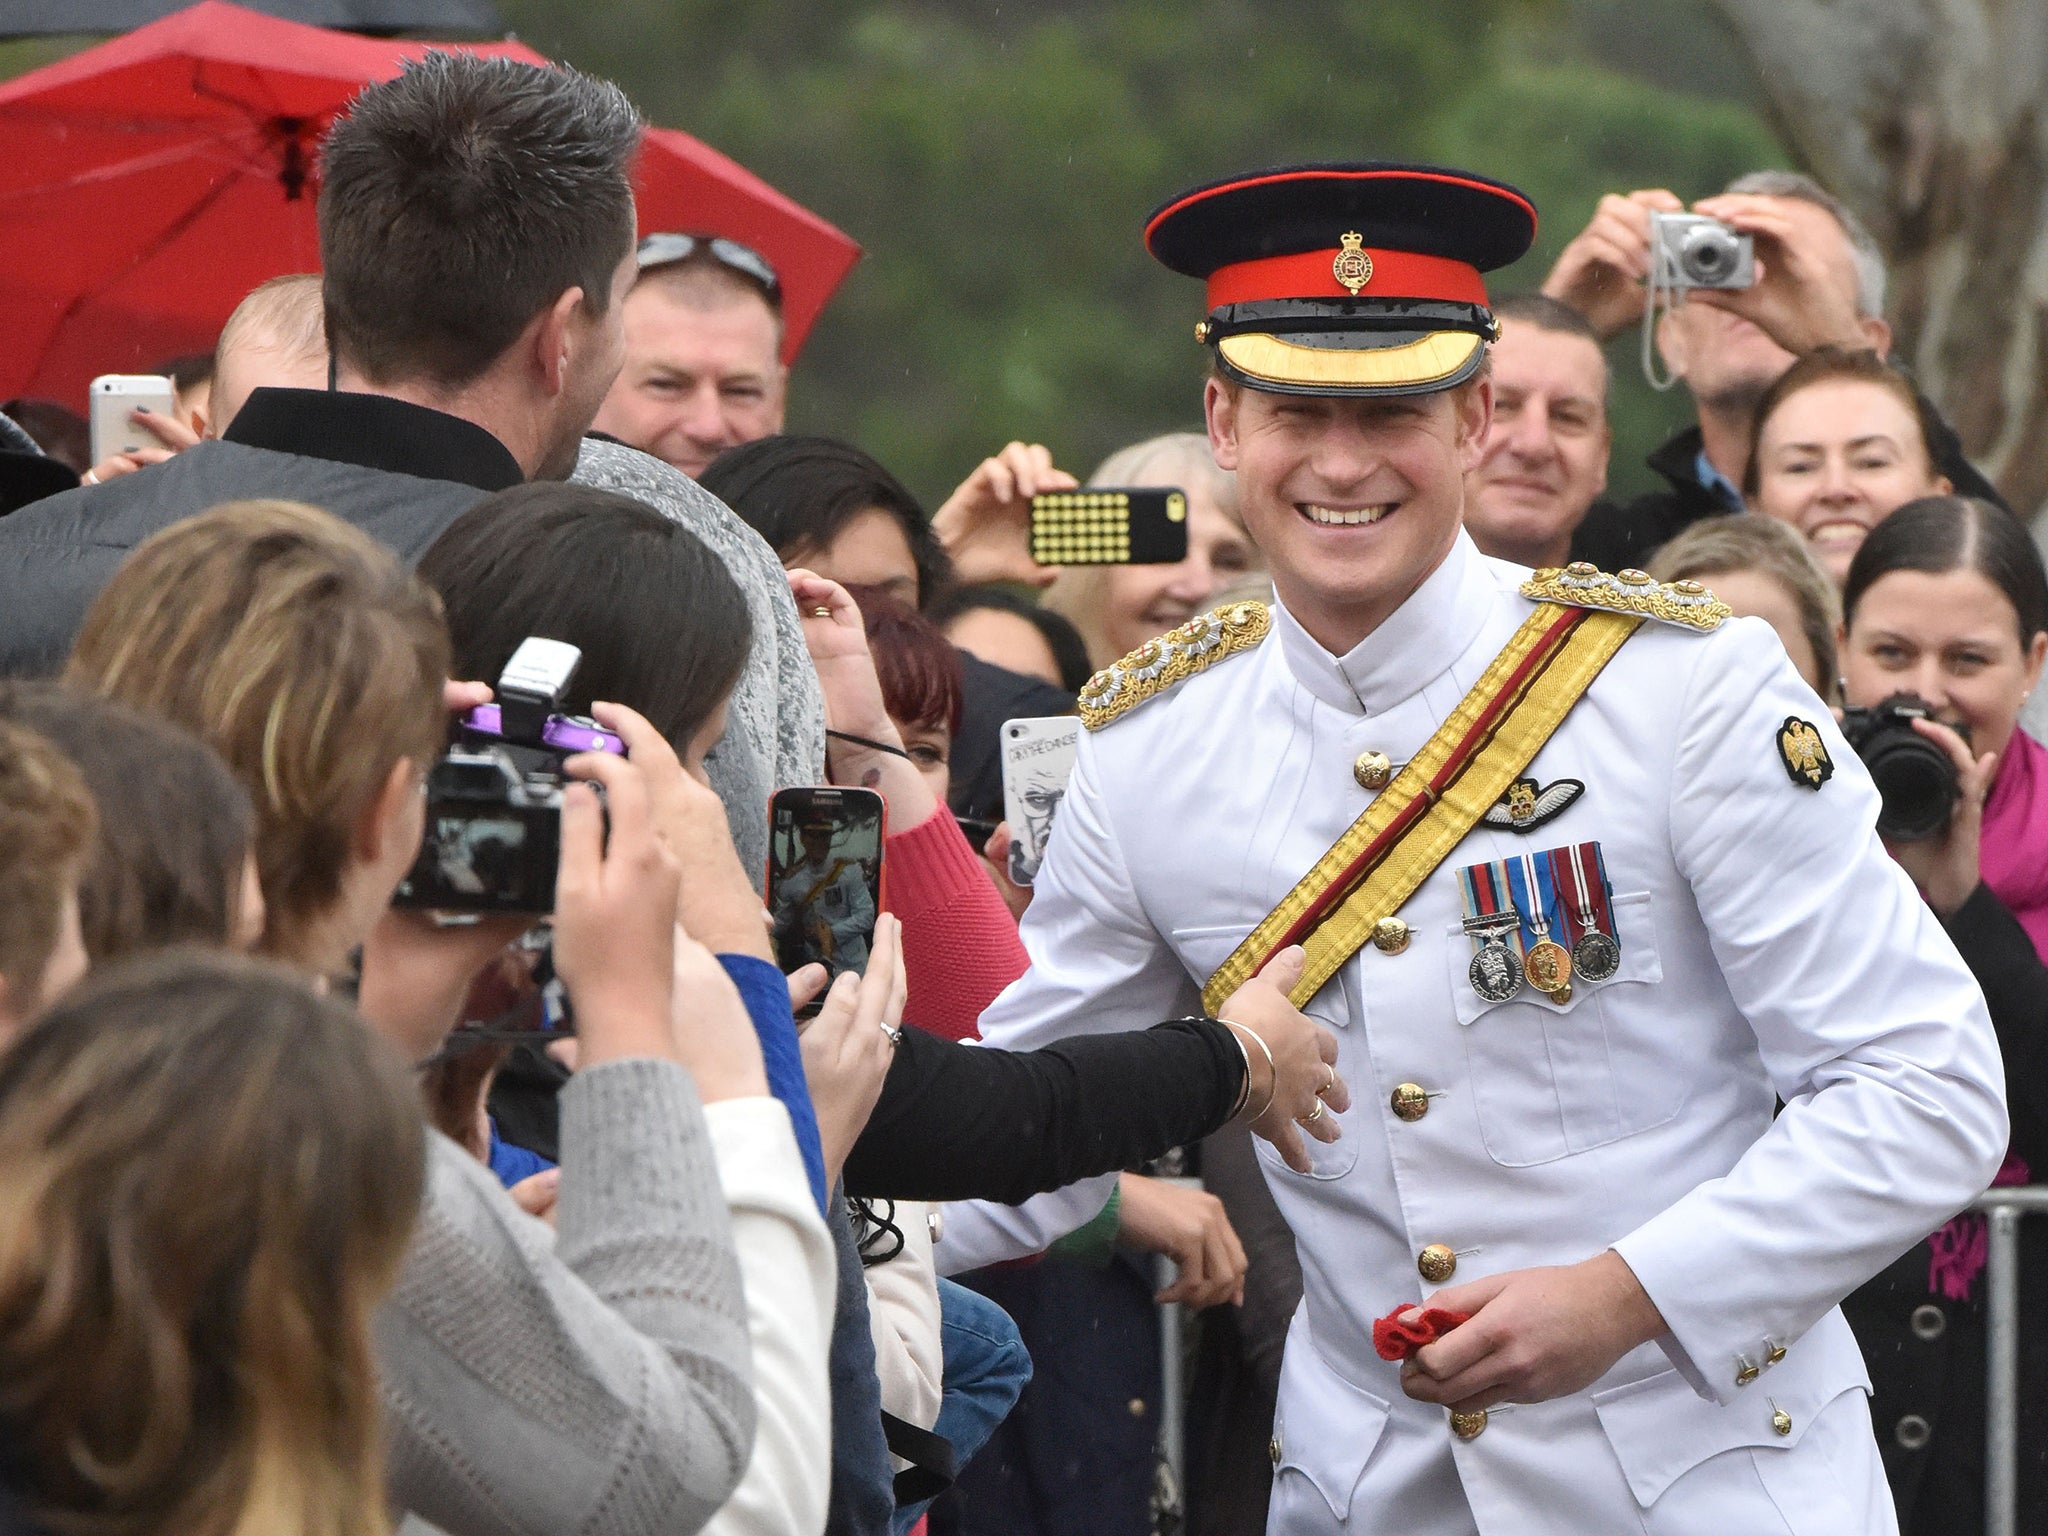 Prince Harry has now been bestowed with the title of Knight Commander of the Royal Victorian Order